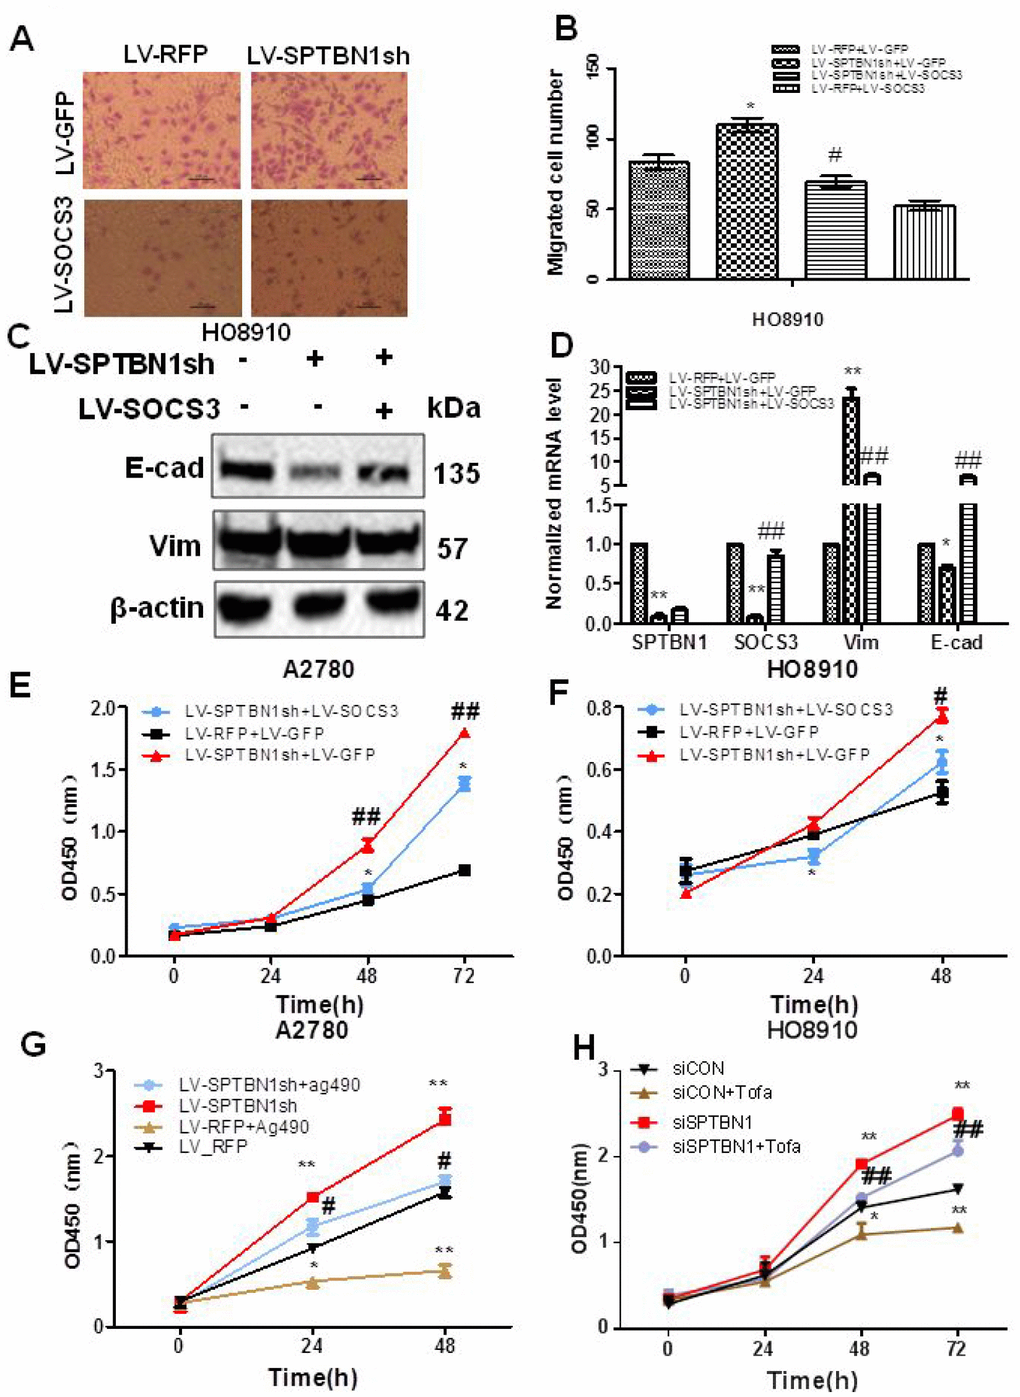 SOCS3 overexpression or the JAK2 inhibitor reverses the inhibitory effects of SPTBN1 on cell viability and migration. (A, B) In vitro cell migration assay. * P P C, D) Comparison of protein (C) and mRNA (D) levels of the EMT-related proteins E-cadherin (E-cad) and Vimentin (Vim). The expression of SOCS3 and E-cadherin was decreased and Vimentin was increased by the loss of SPTBN1, while SOCS3 overexpression reversed the effects of the loss of SPTBN1. *PPPE–H) Cell viability was determined by CCK8 assay. SOCS3 overexpression reversed the enhanced cell viability due to the loss of SPTBN1 in A2780 (E) and HO8910 cells (F). #PPPG) and HO8910 cells (H). *PPP